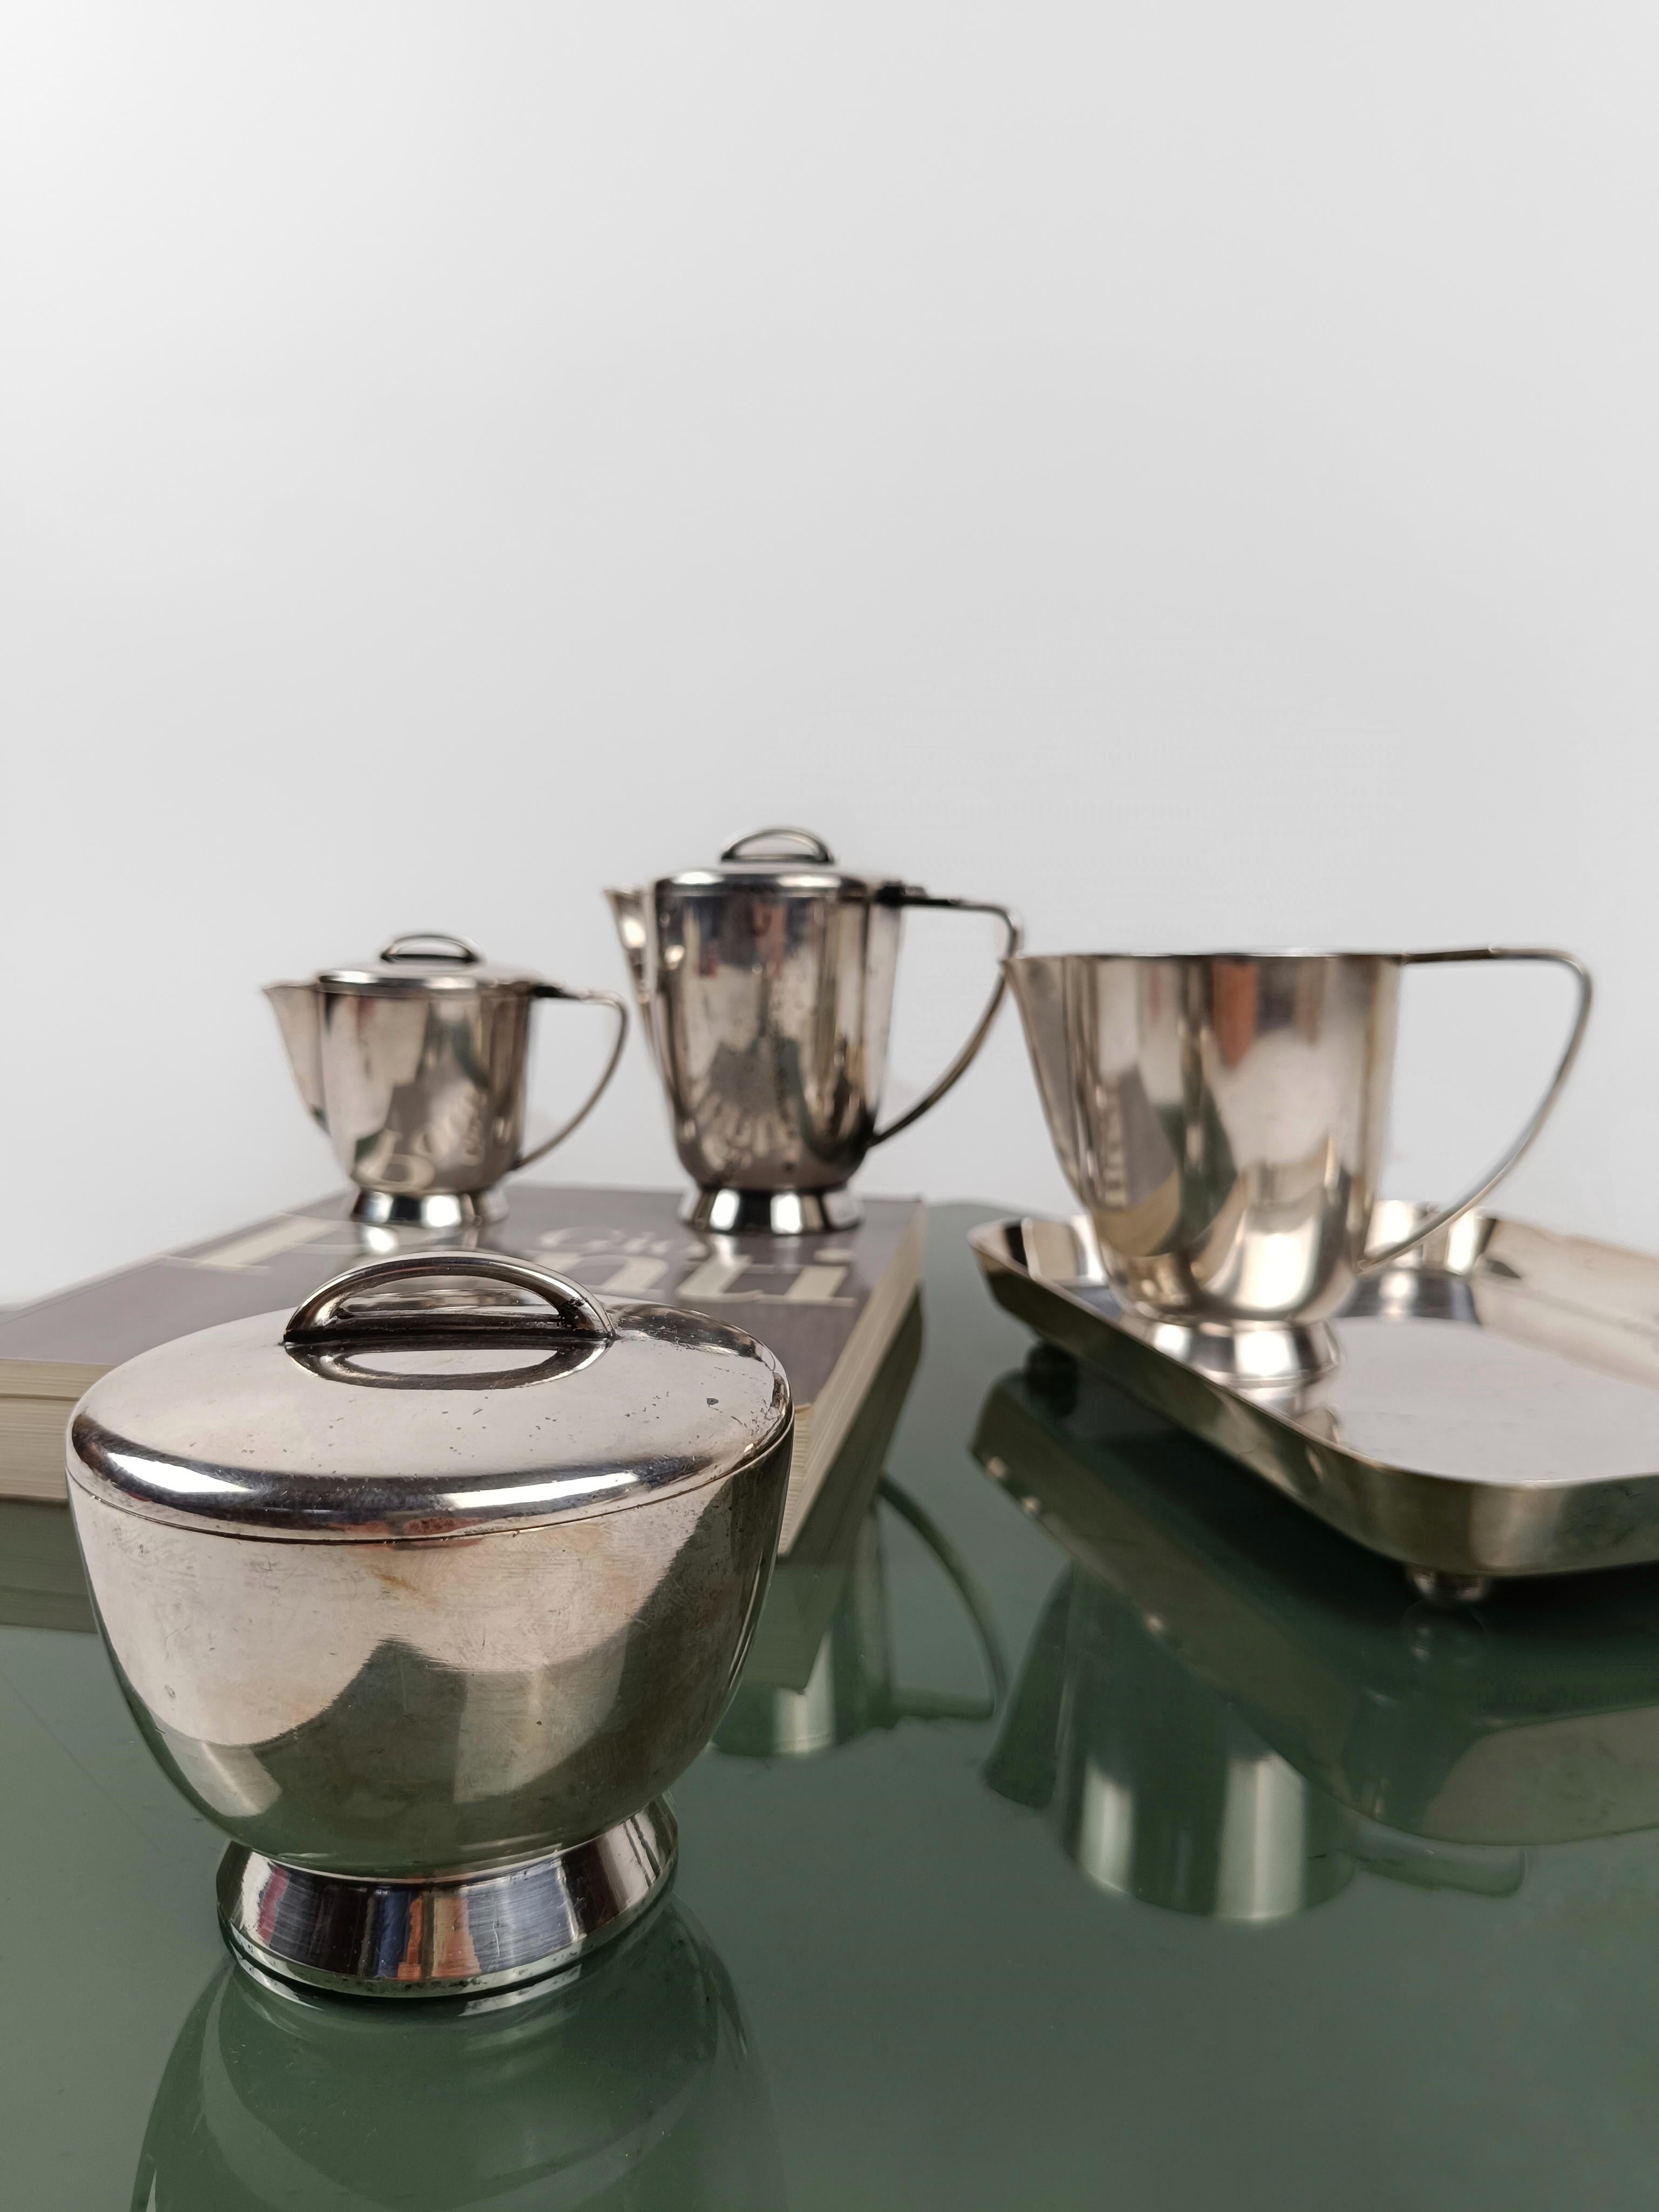 Tea or coffee set designed by Gio Ponti for the Hotel Parco Dei Principi in Rome and produced by the historic Italian manufacturer Fratelli Calderoni between 1950s and 1960s.
This vintage breakfast set consists of 5 pieces:
1 small teapot with